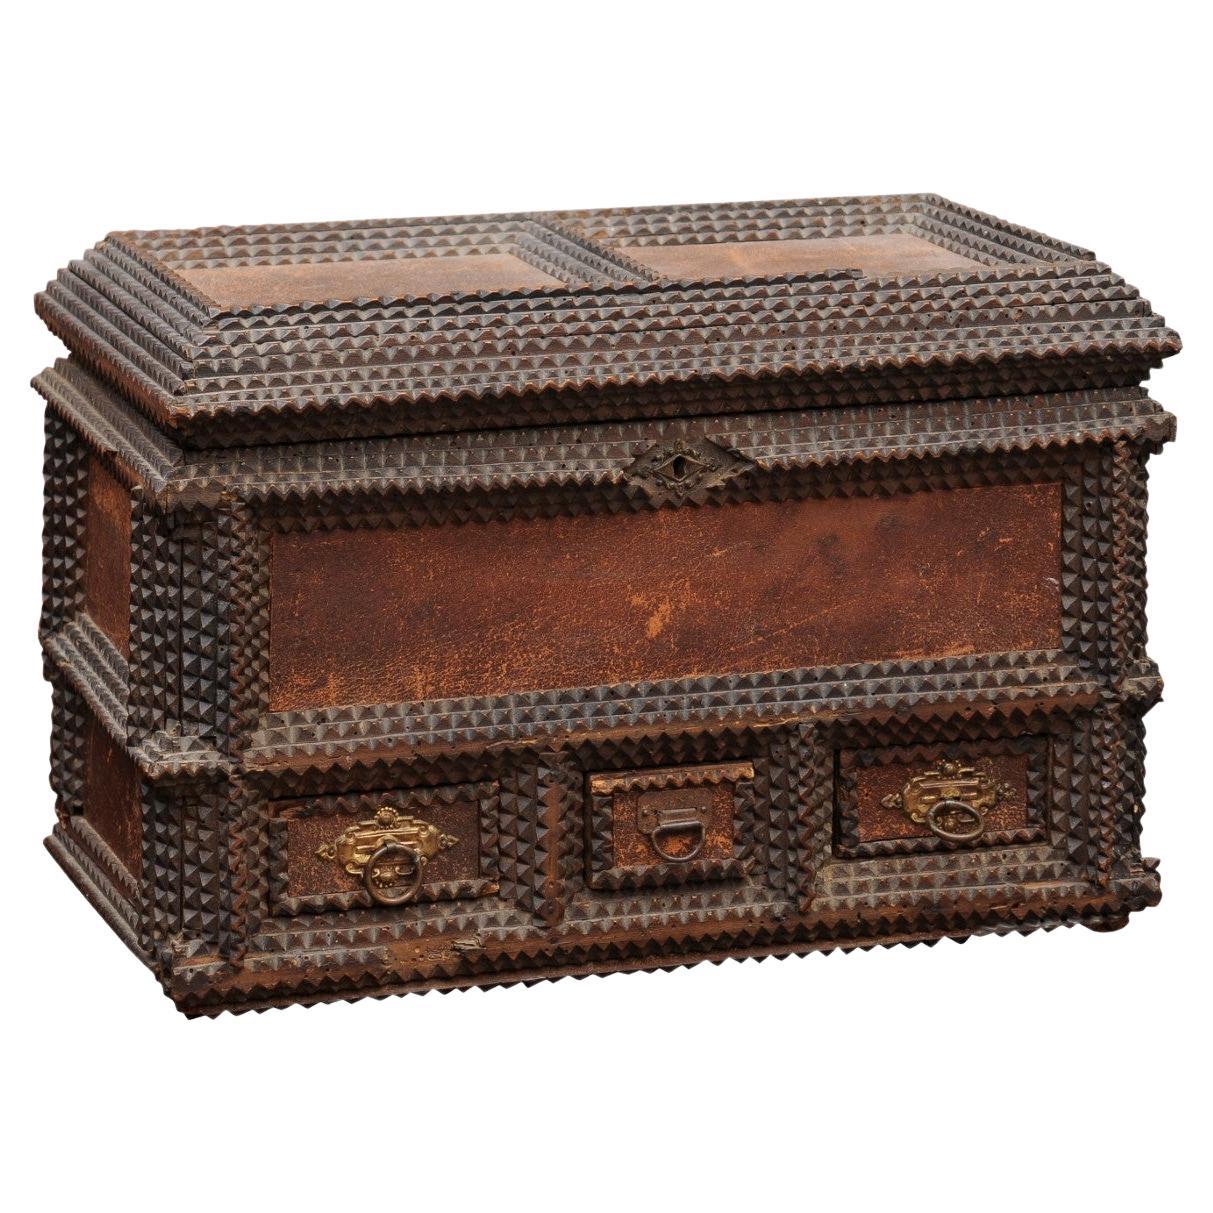 Tramp Art Dresser Box with Leather Panels, Signed ca. 1900 For Sale